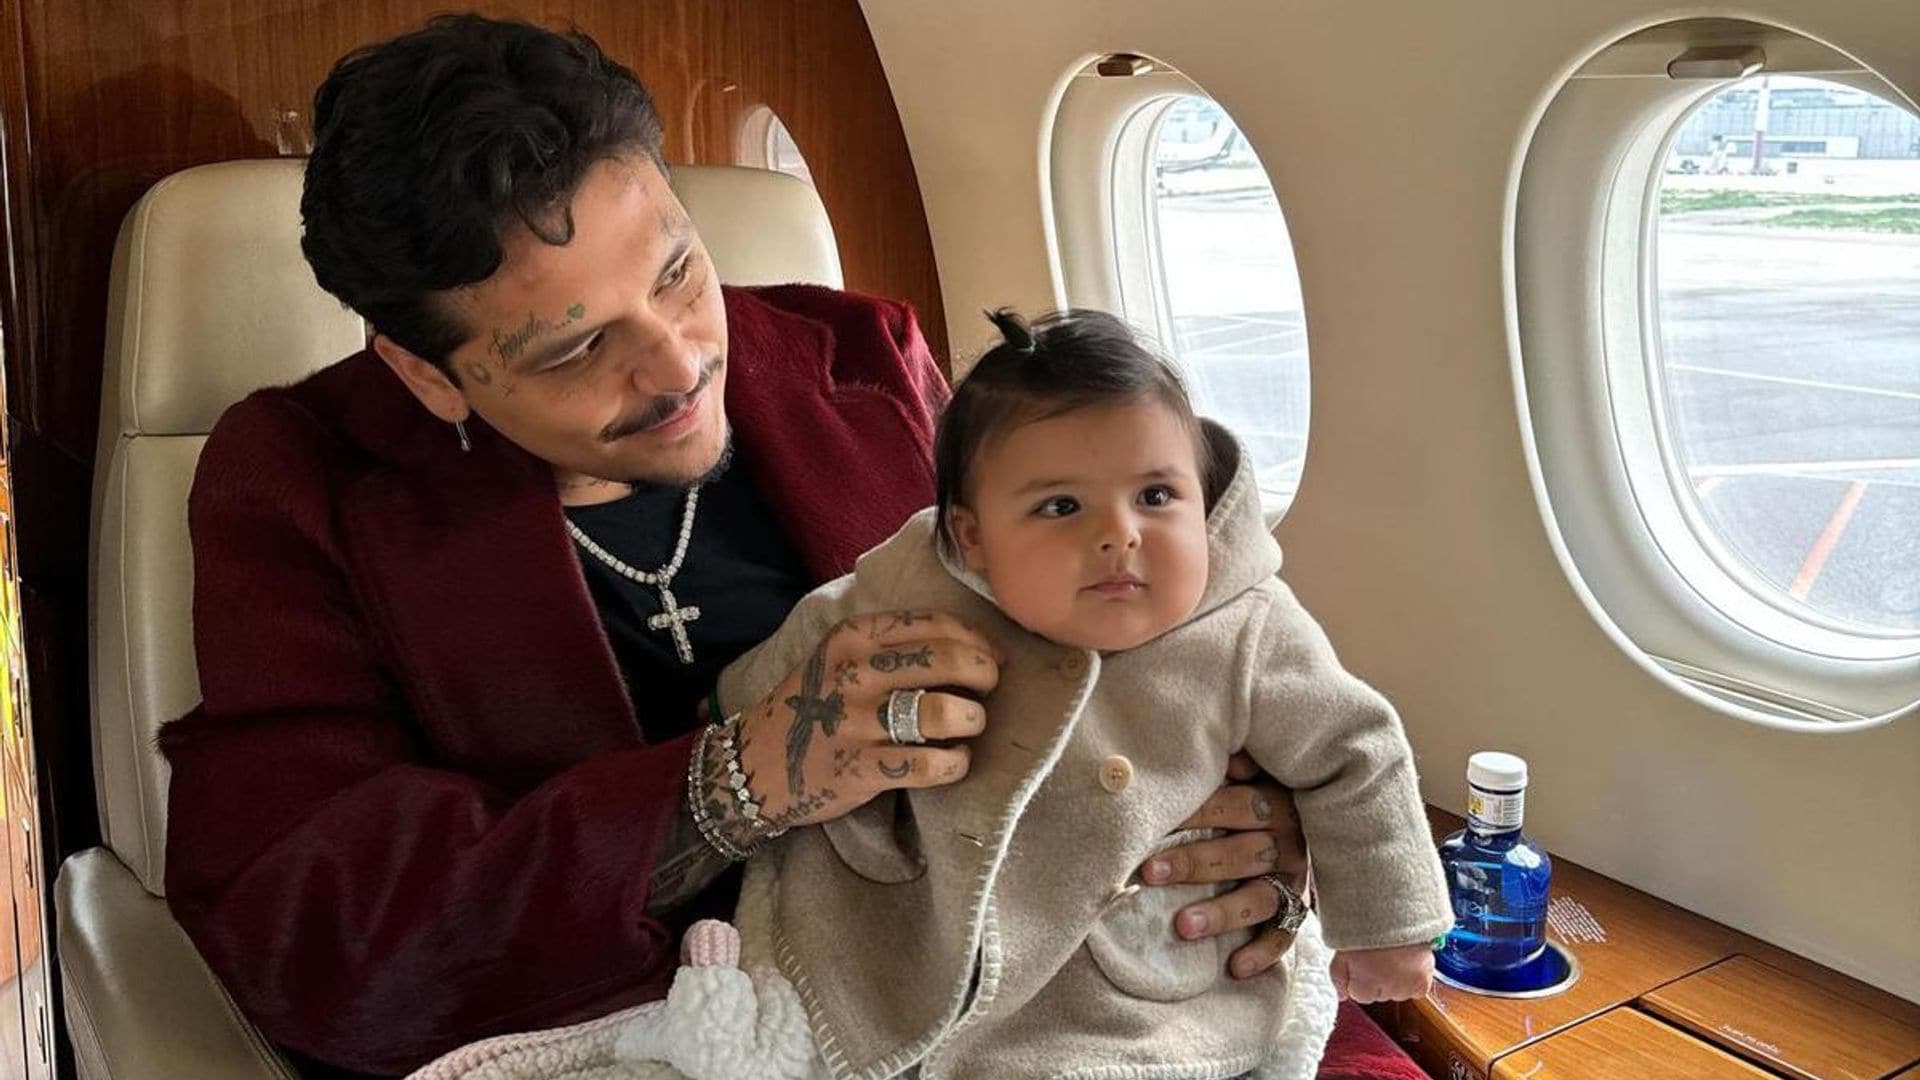 Christian Nodal dedicates an emotional message to his daughter Inti on his first Father’s Day